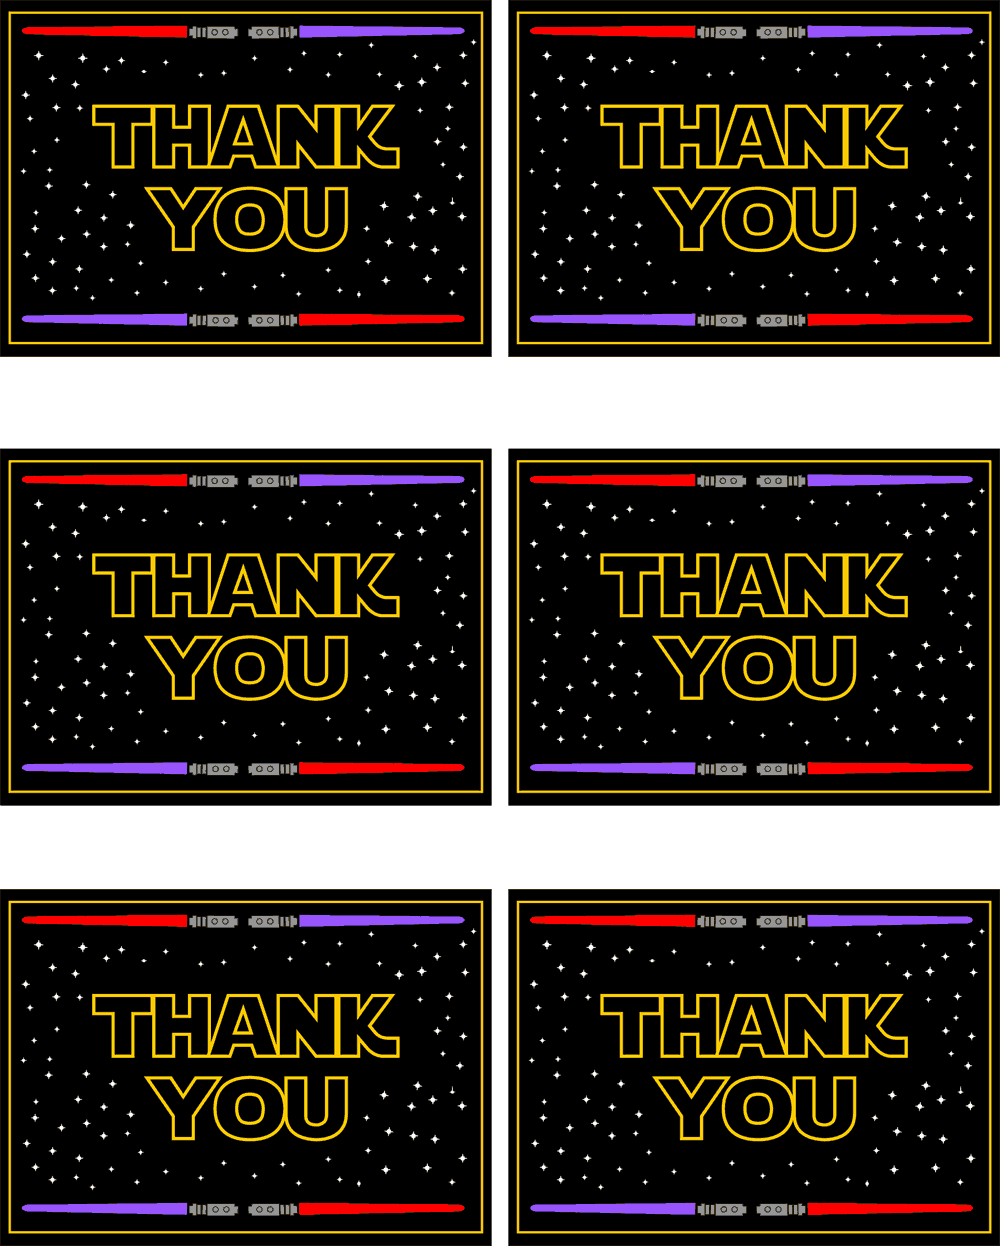 Star Wars Printable Thank You Cards Free